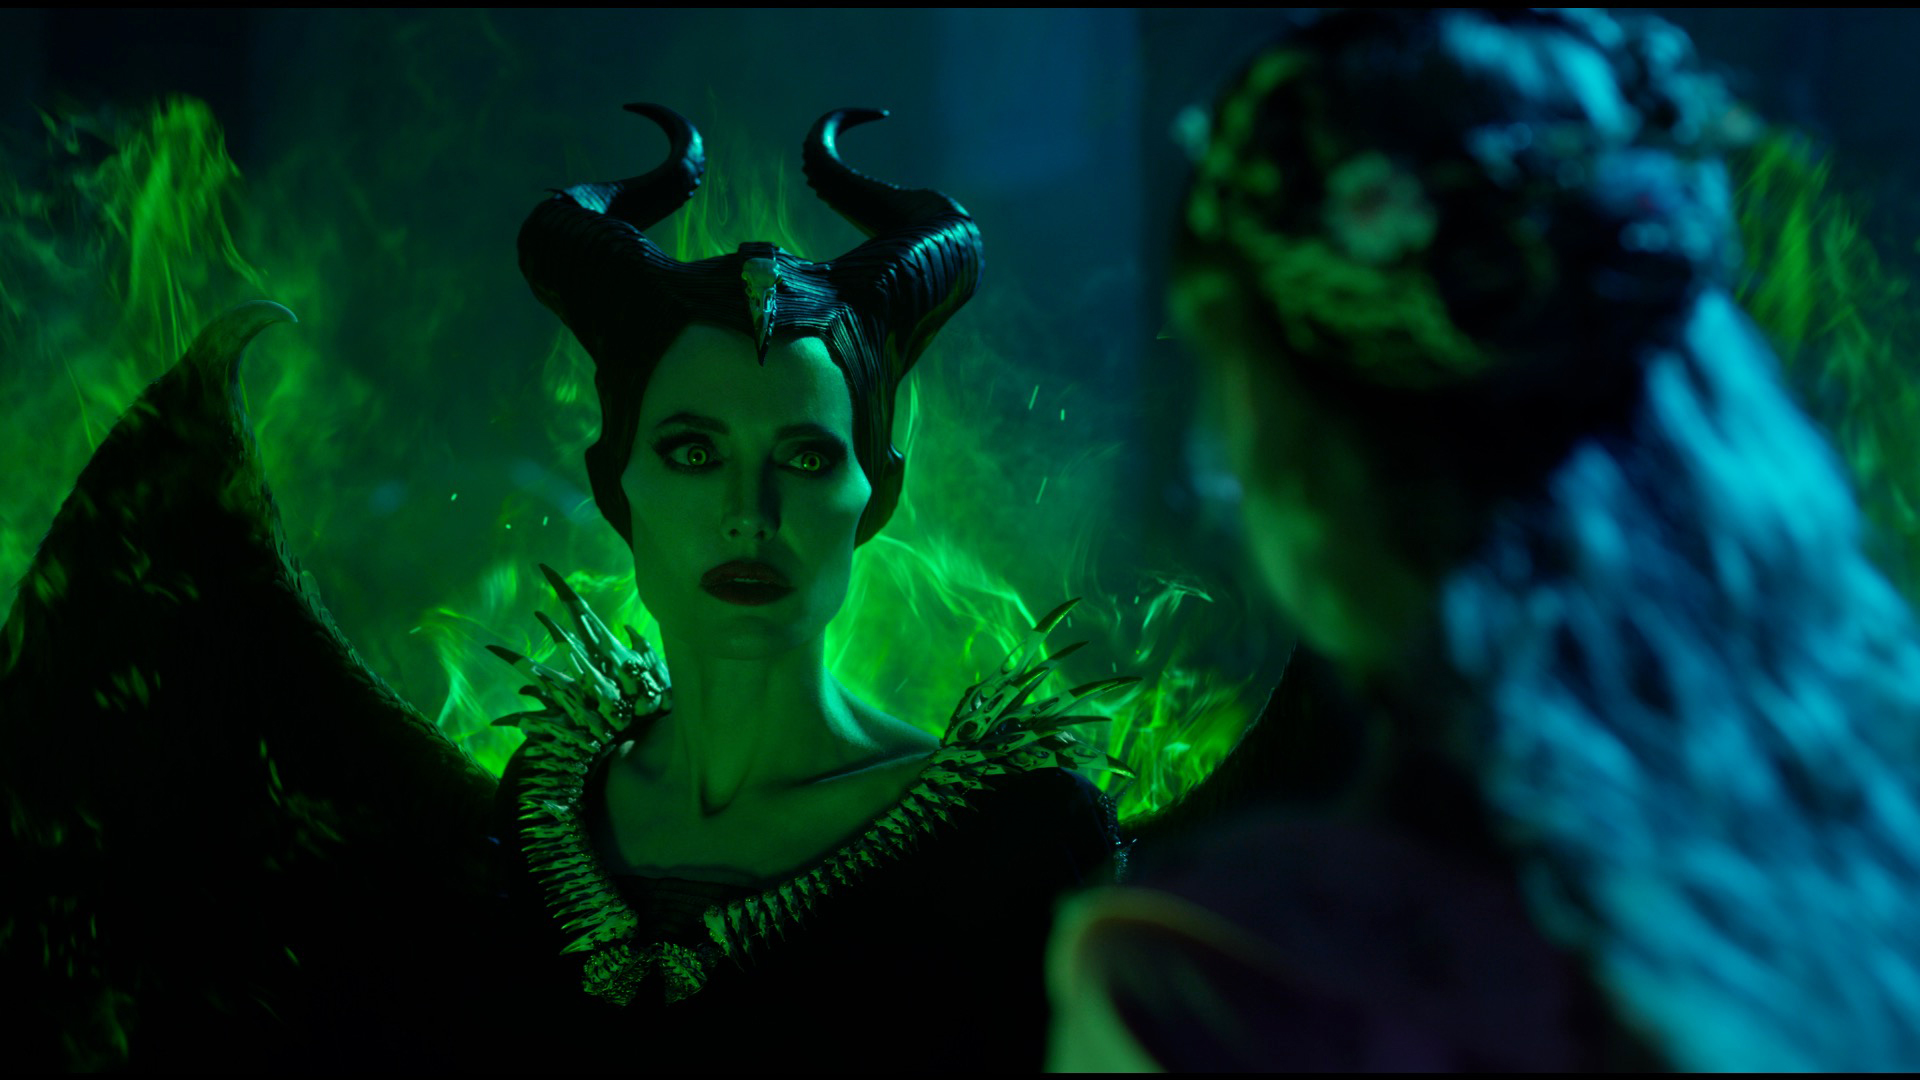 Angelina Jolie is Maleficent and Elle Fanning is Aurora in Disneyâ€™s MALEFICENT: MISTRESS OF EVIL.